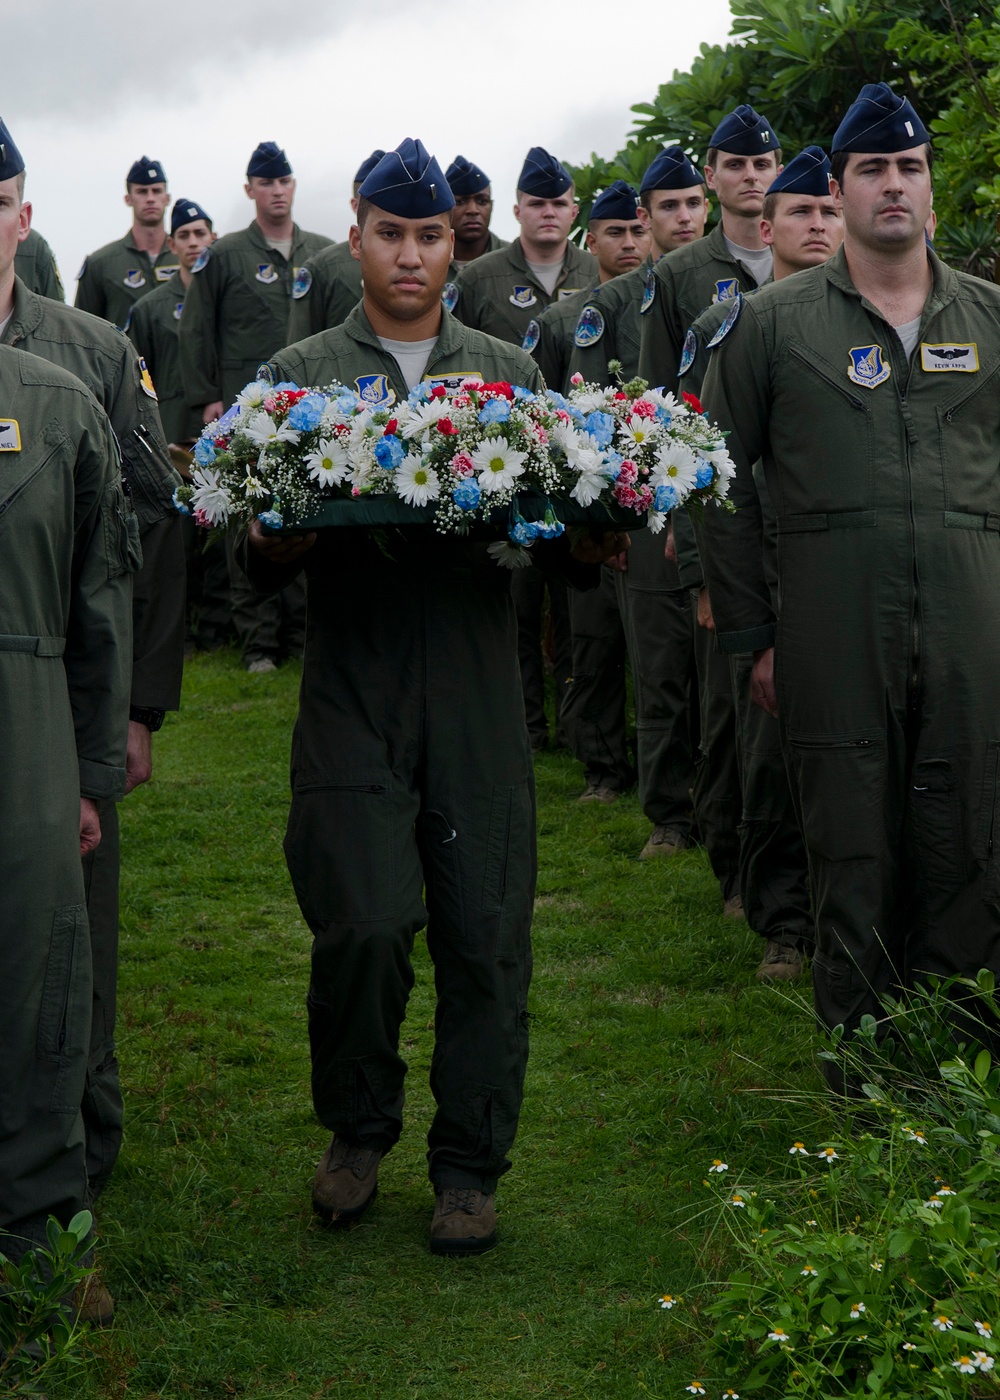 Raider 21 remembered by deployed aircrew